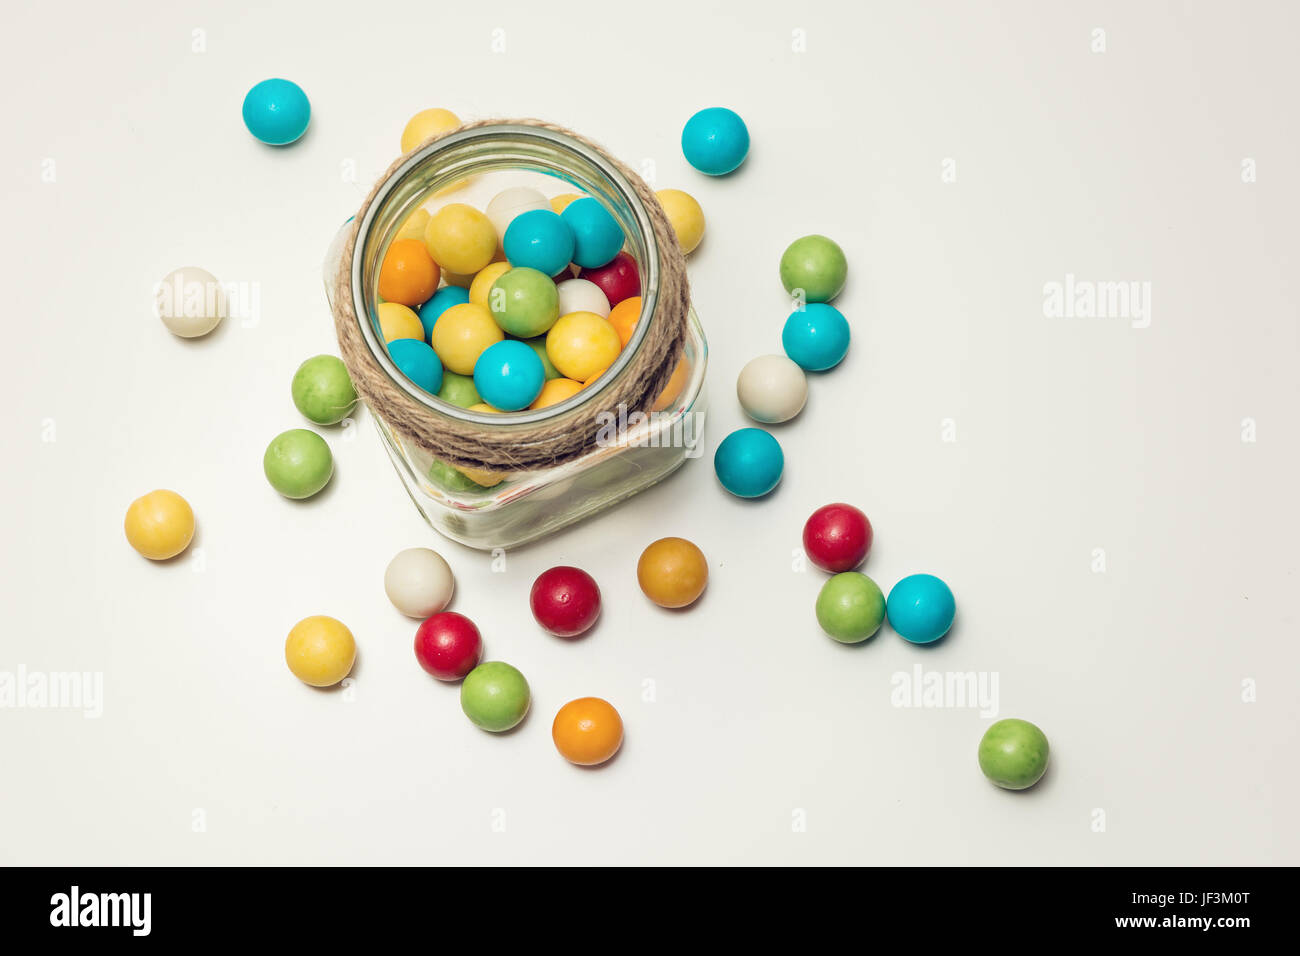 Colored chewing gum balls in container Stock Photo